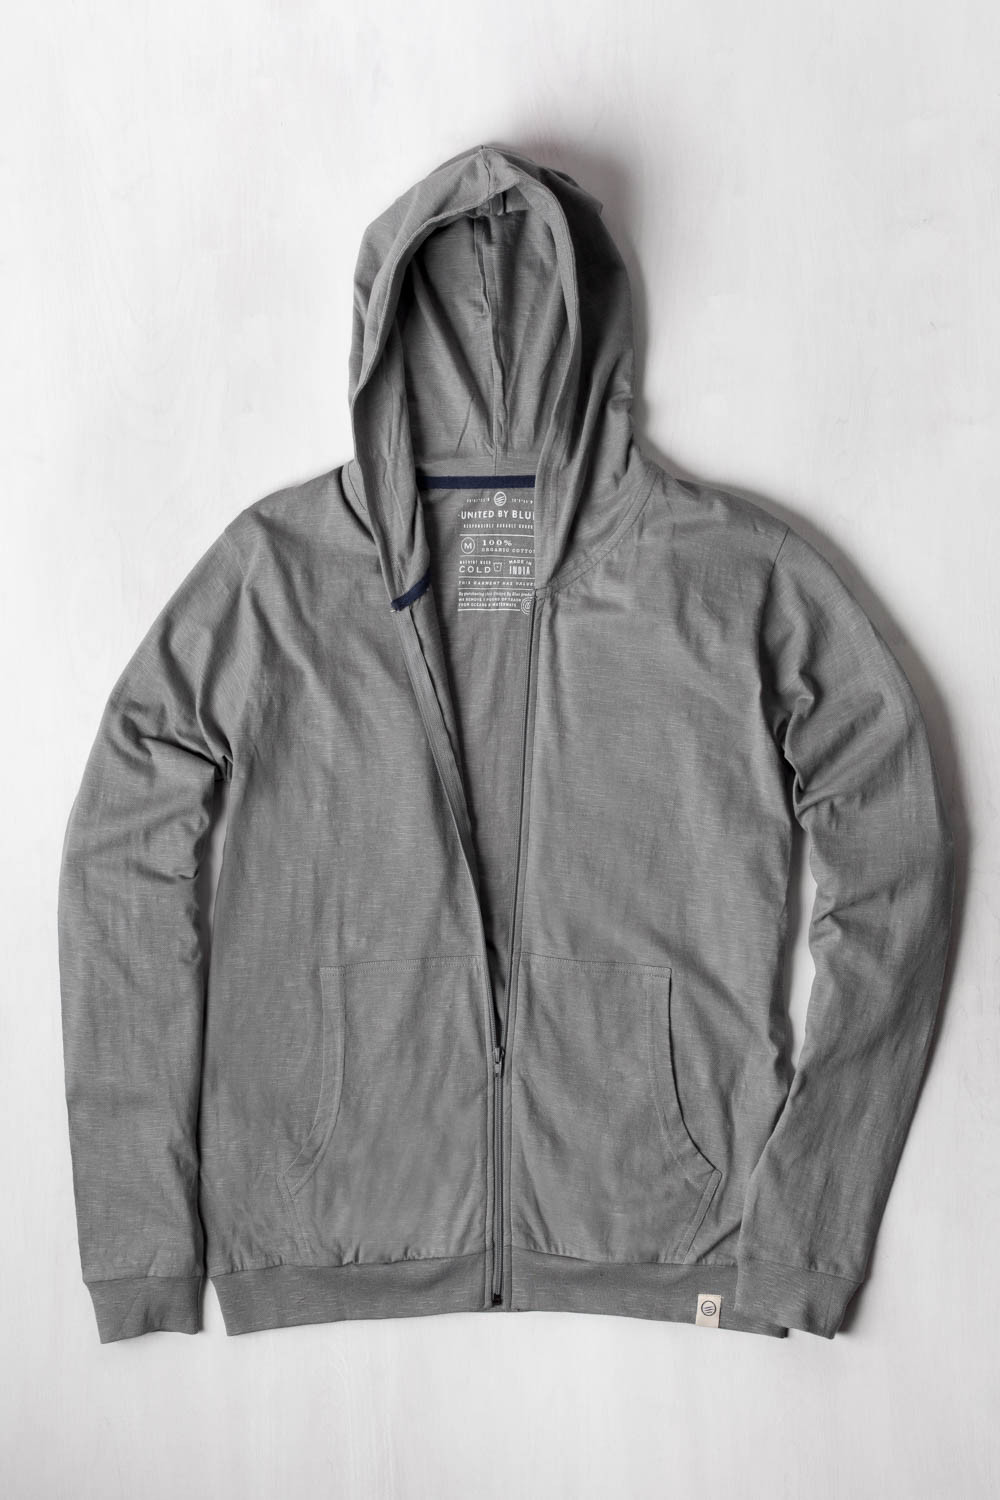 Jonathan Ellsworth reviews the United by Blue Men's Standard Zip Hoodie for Blister Gear Review